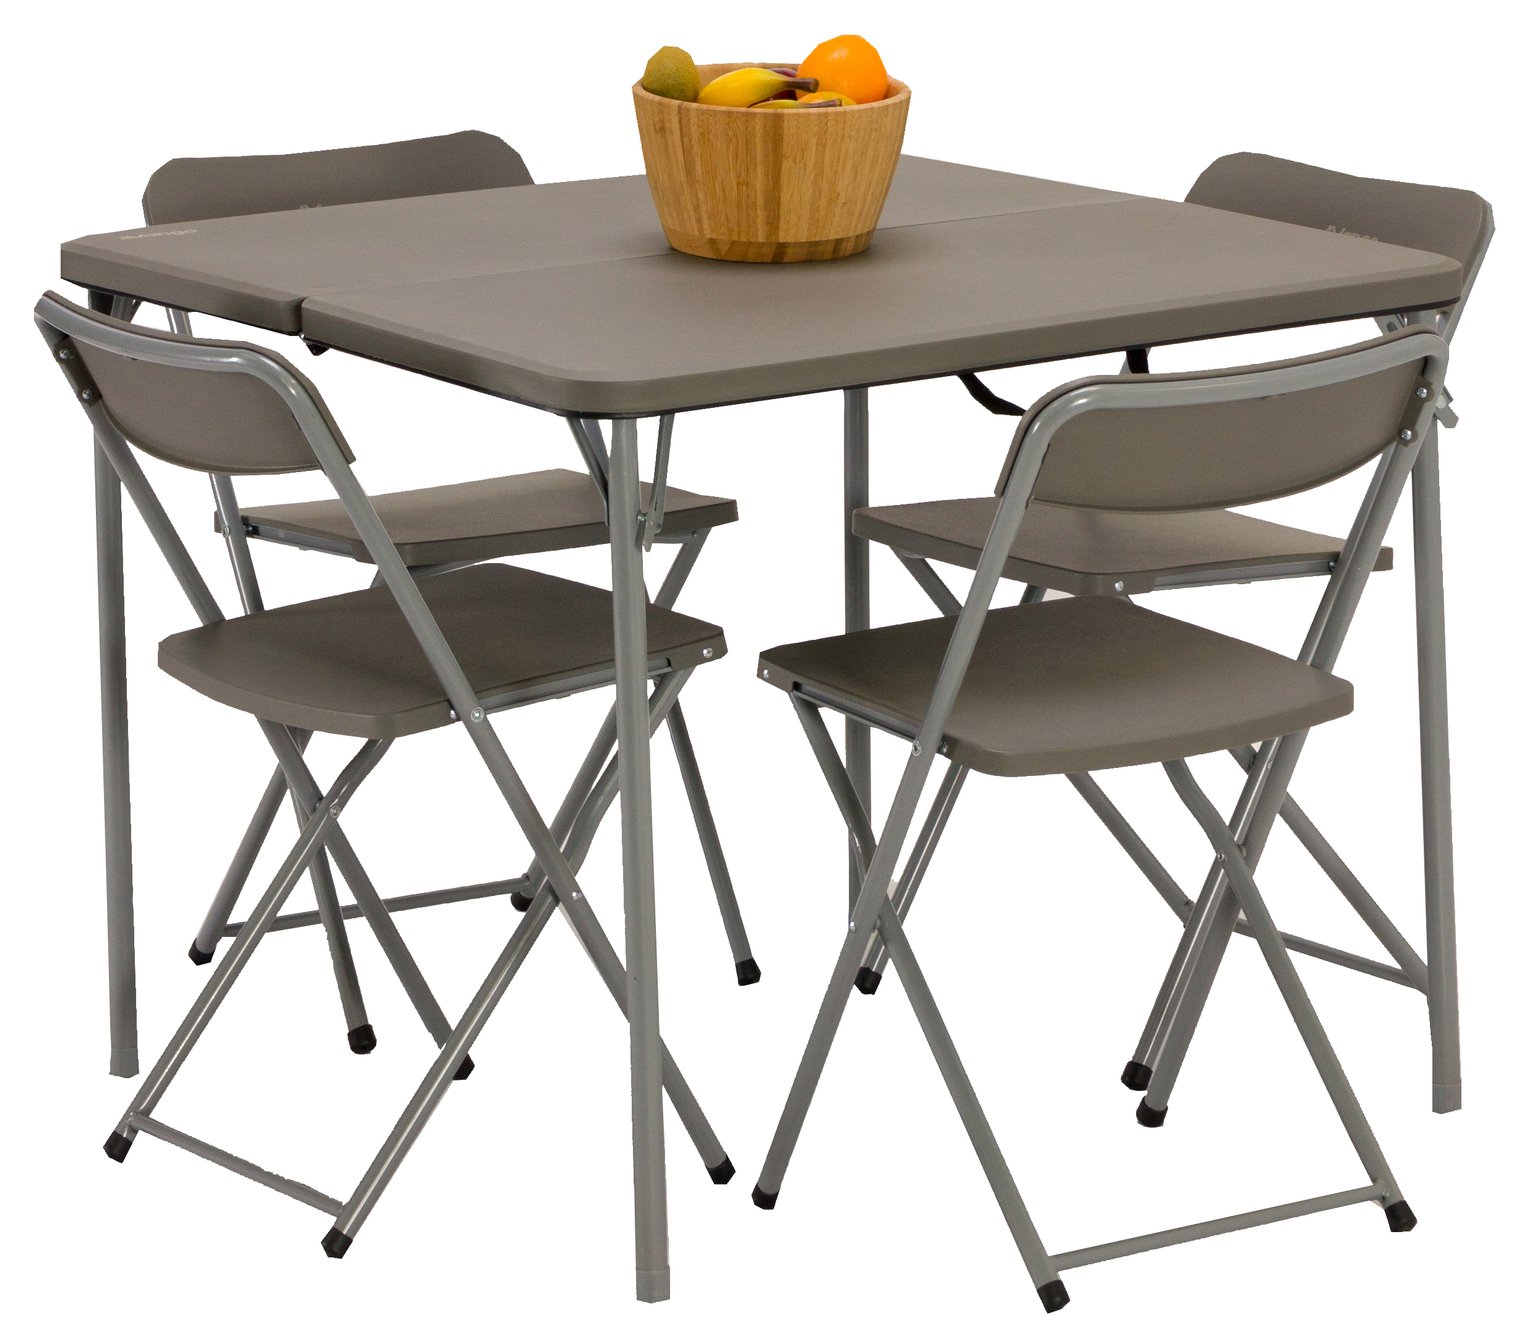 Vango Orchard Camping Table and Chair Set